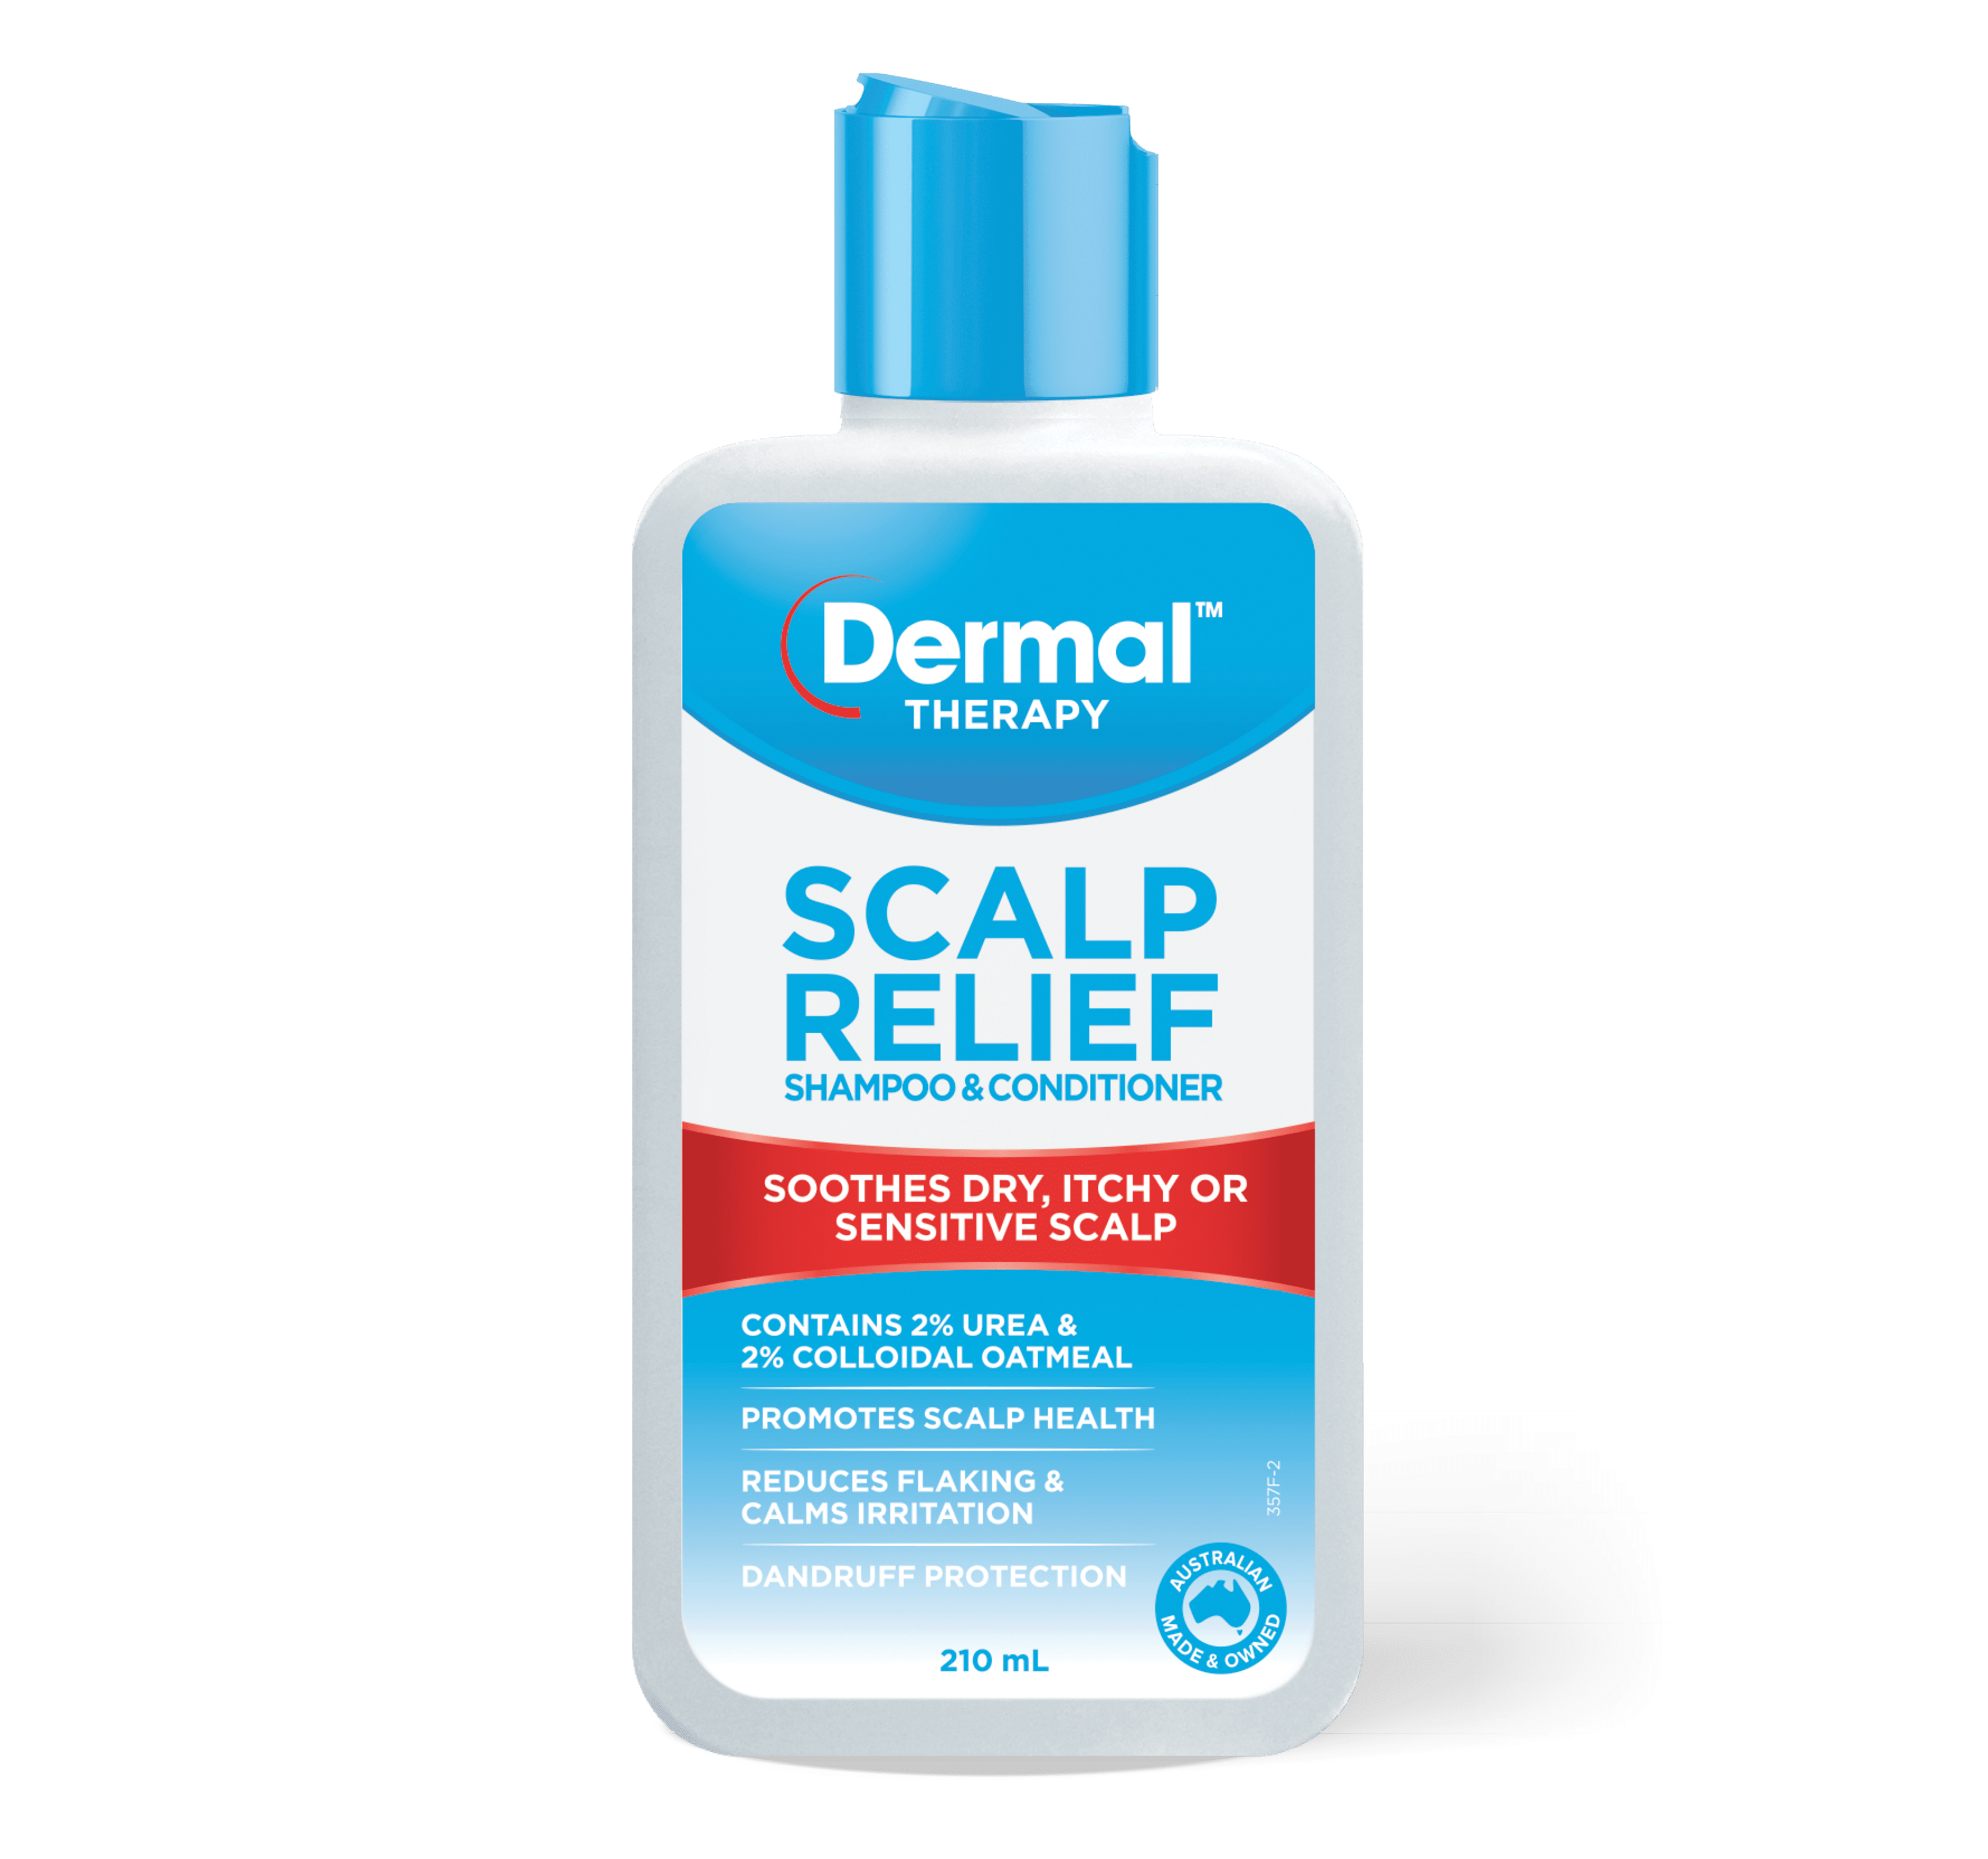 scalp relief shampoo,scalp relief,itchy scalp,dry scalp,flaky scalp,scalp relief serum,pruritus scalp,scalp relief conditioner,itchy scalp causes,dry itchy scalp,dry flaky scalp